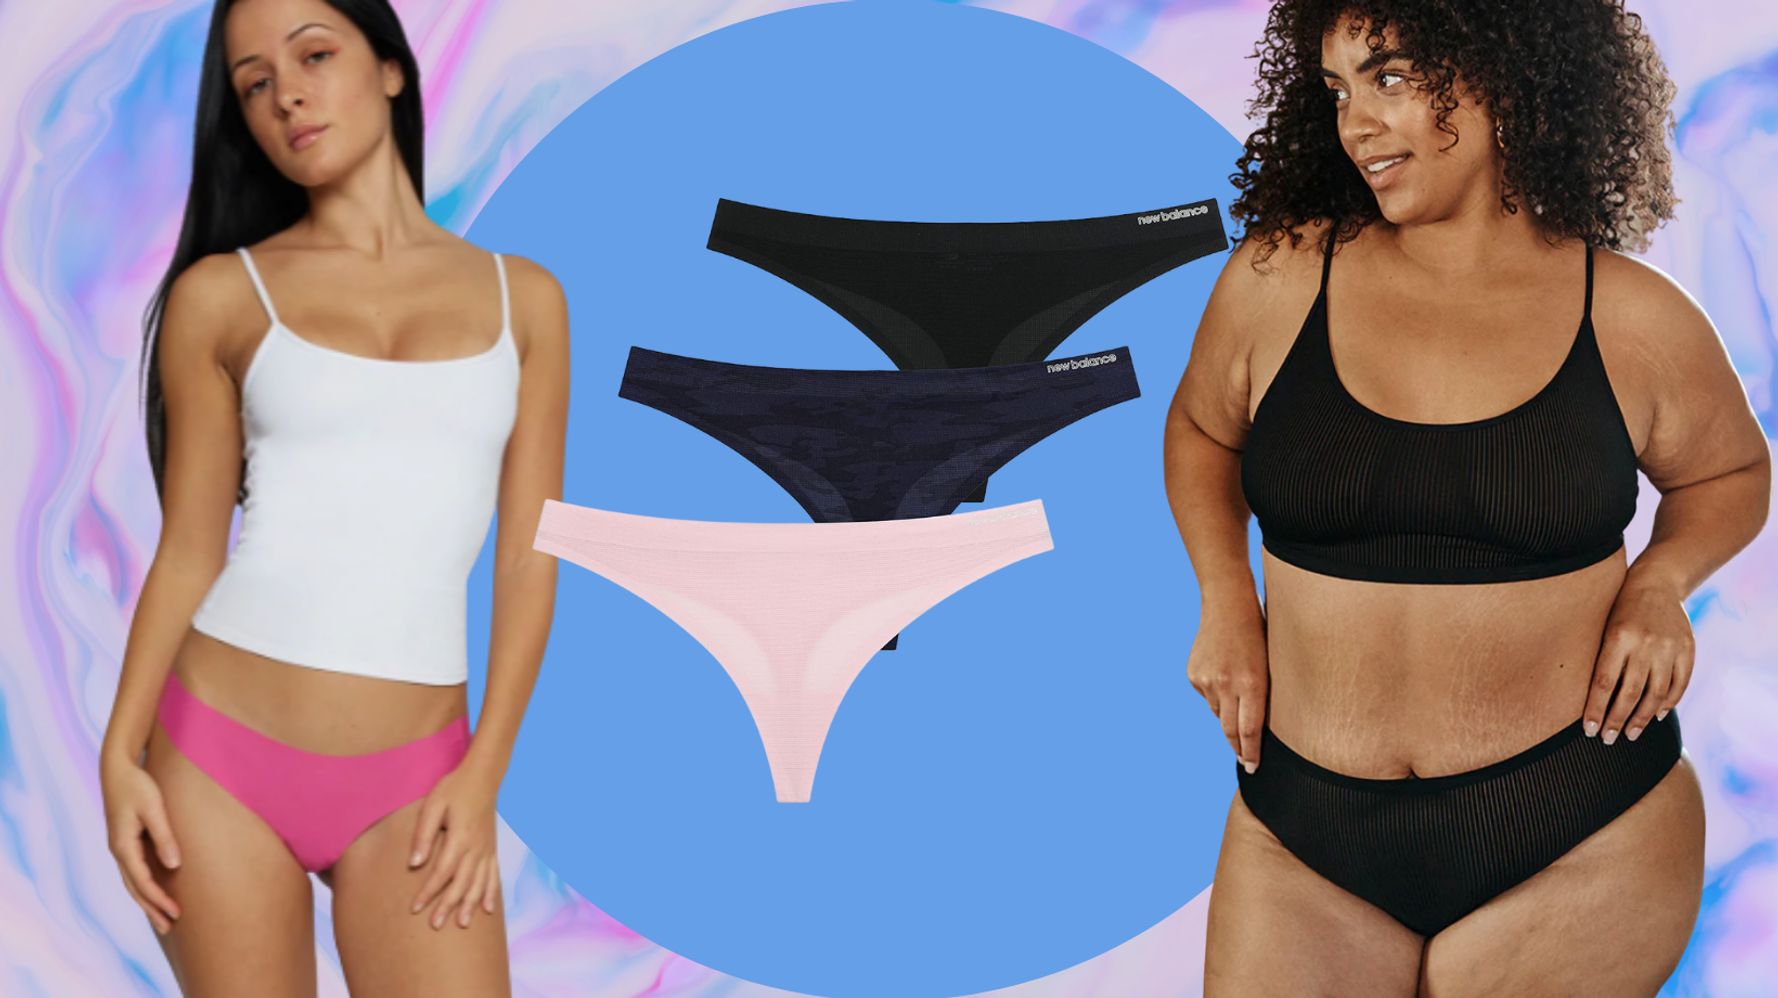 Breathable Lightweight Underwear For Your Sweatiest Workouts